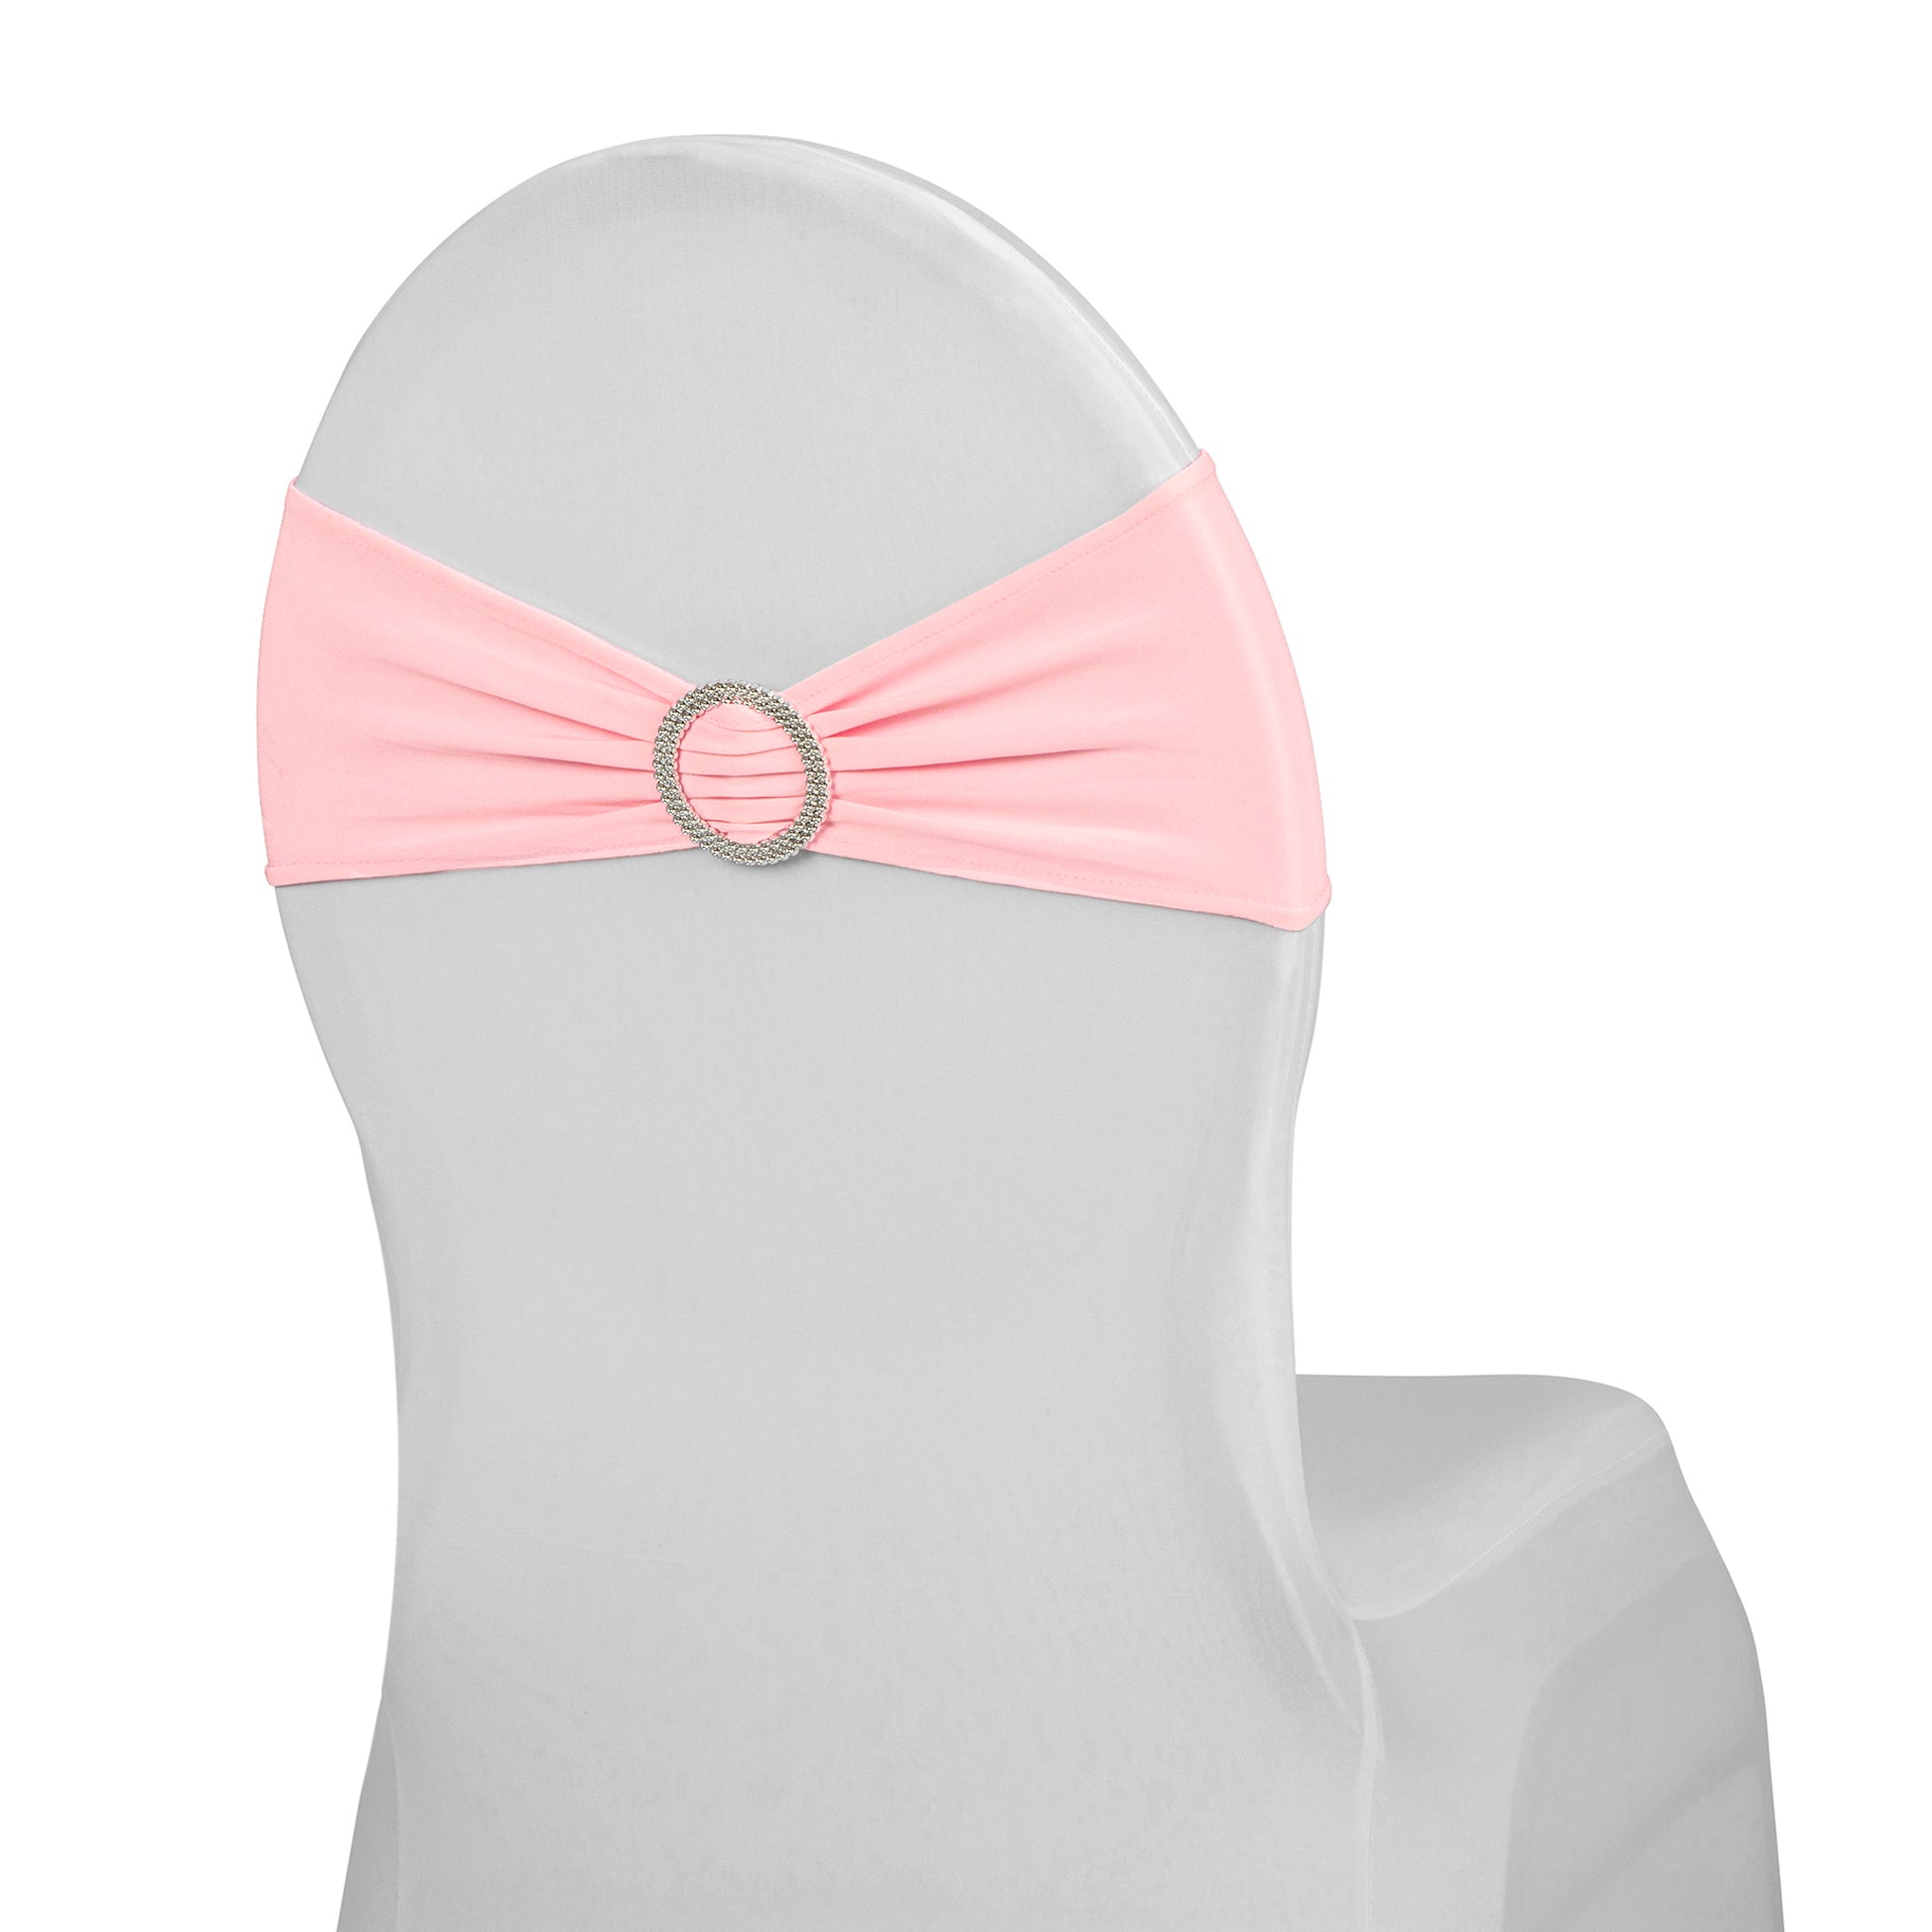 Buckle Spandex Stretch Chair Band - Pink